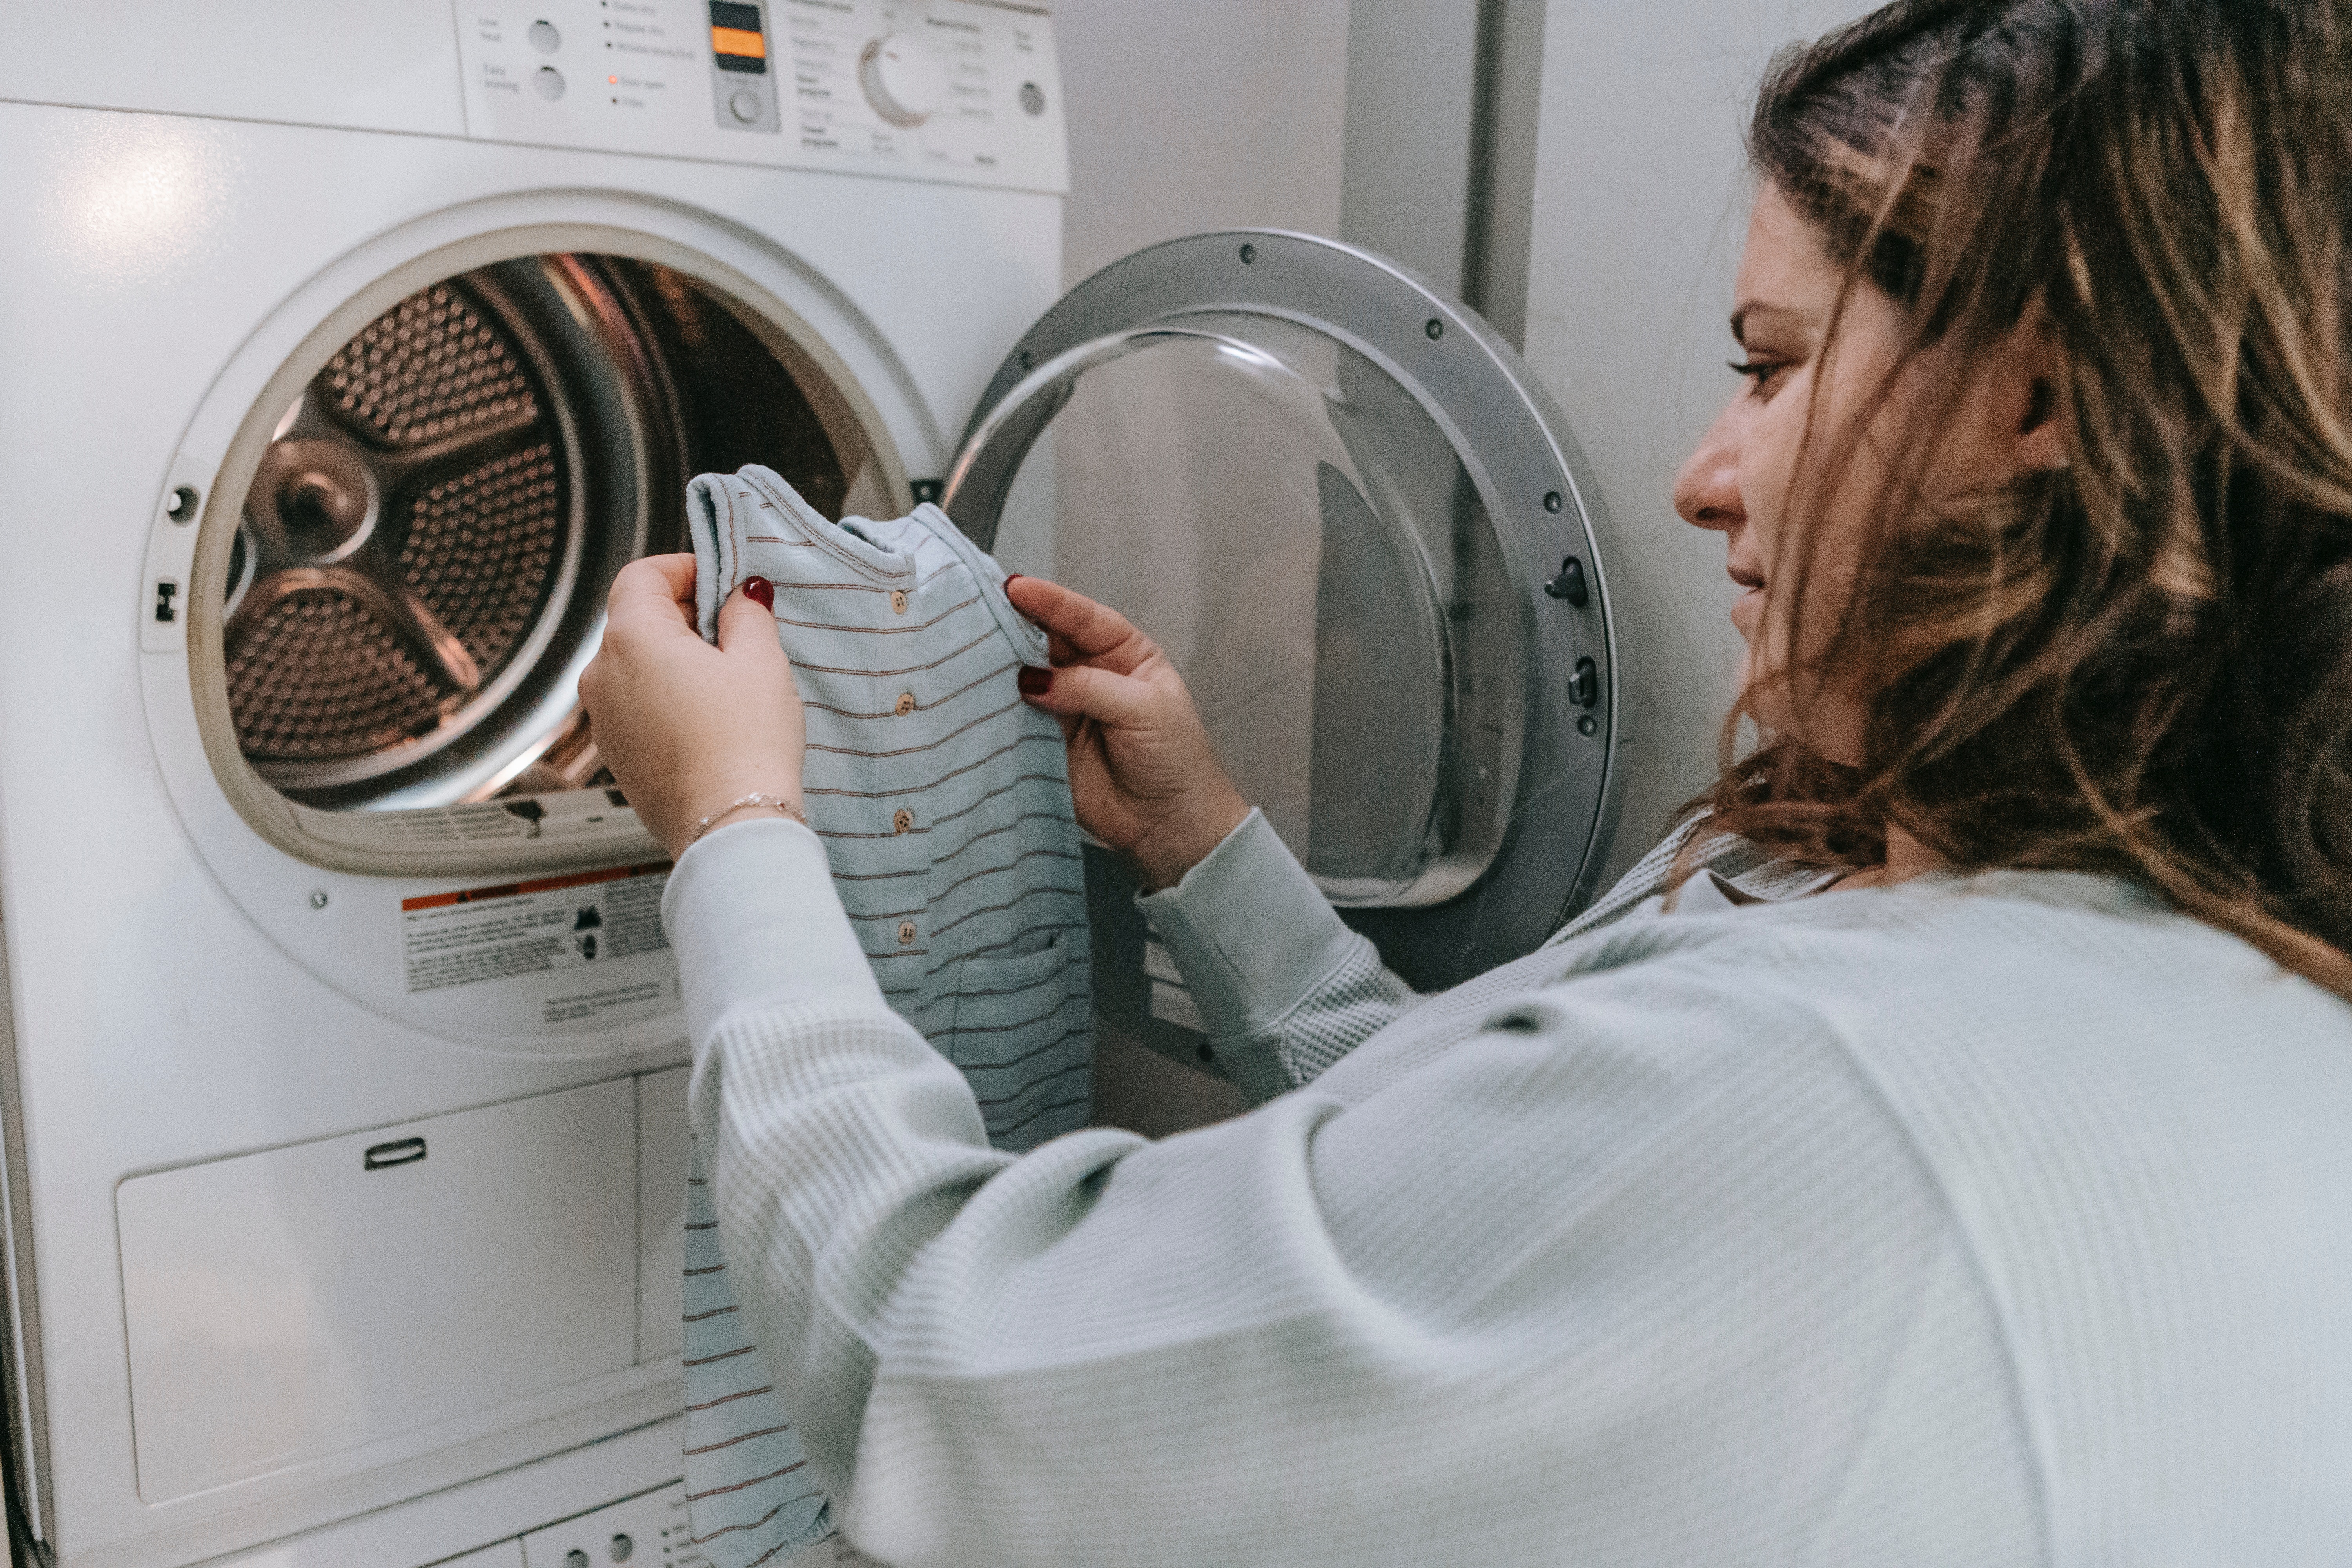 How To Repair A Washing Machine That Won't Spin